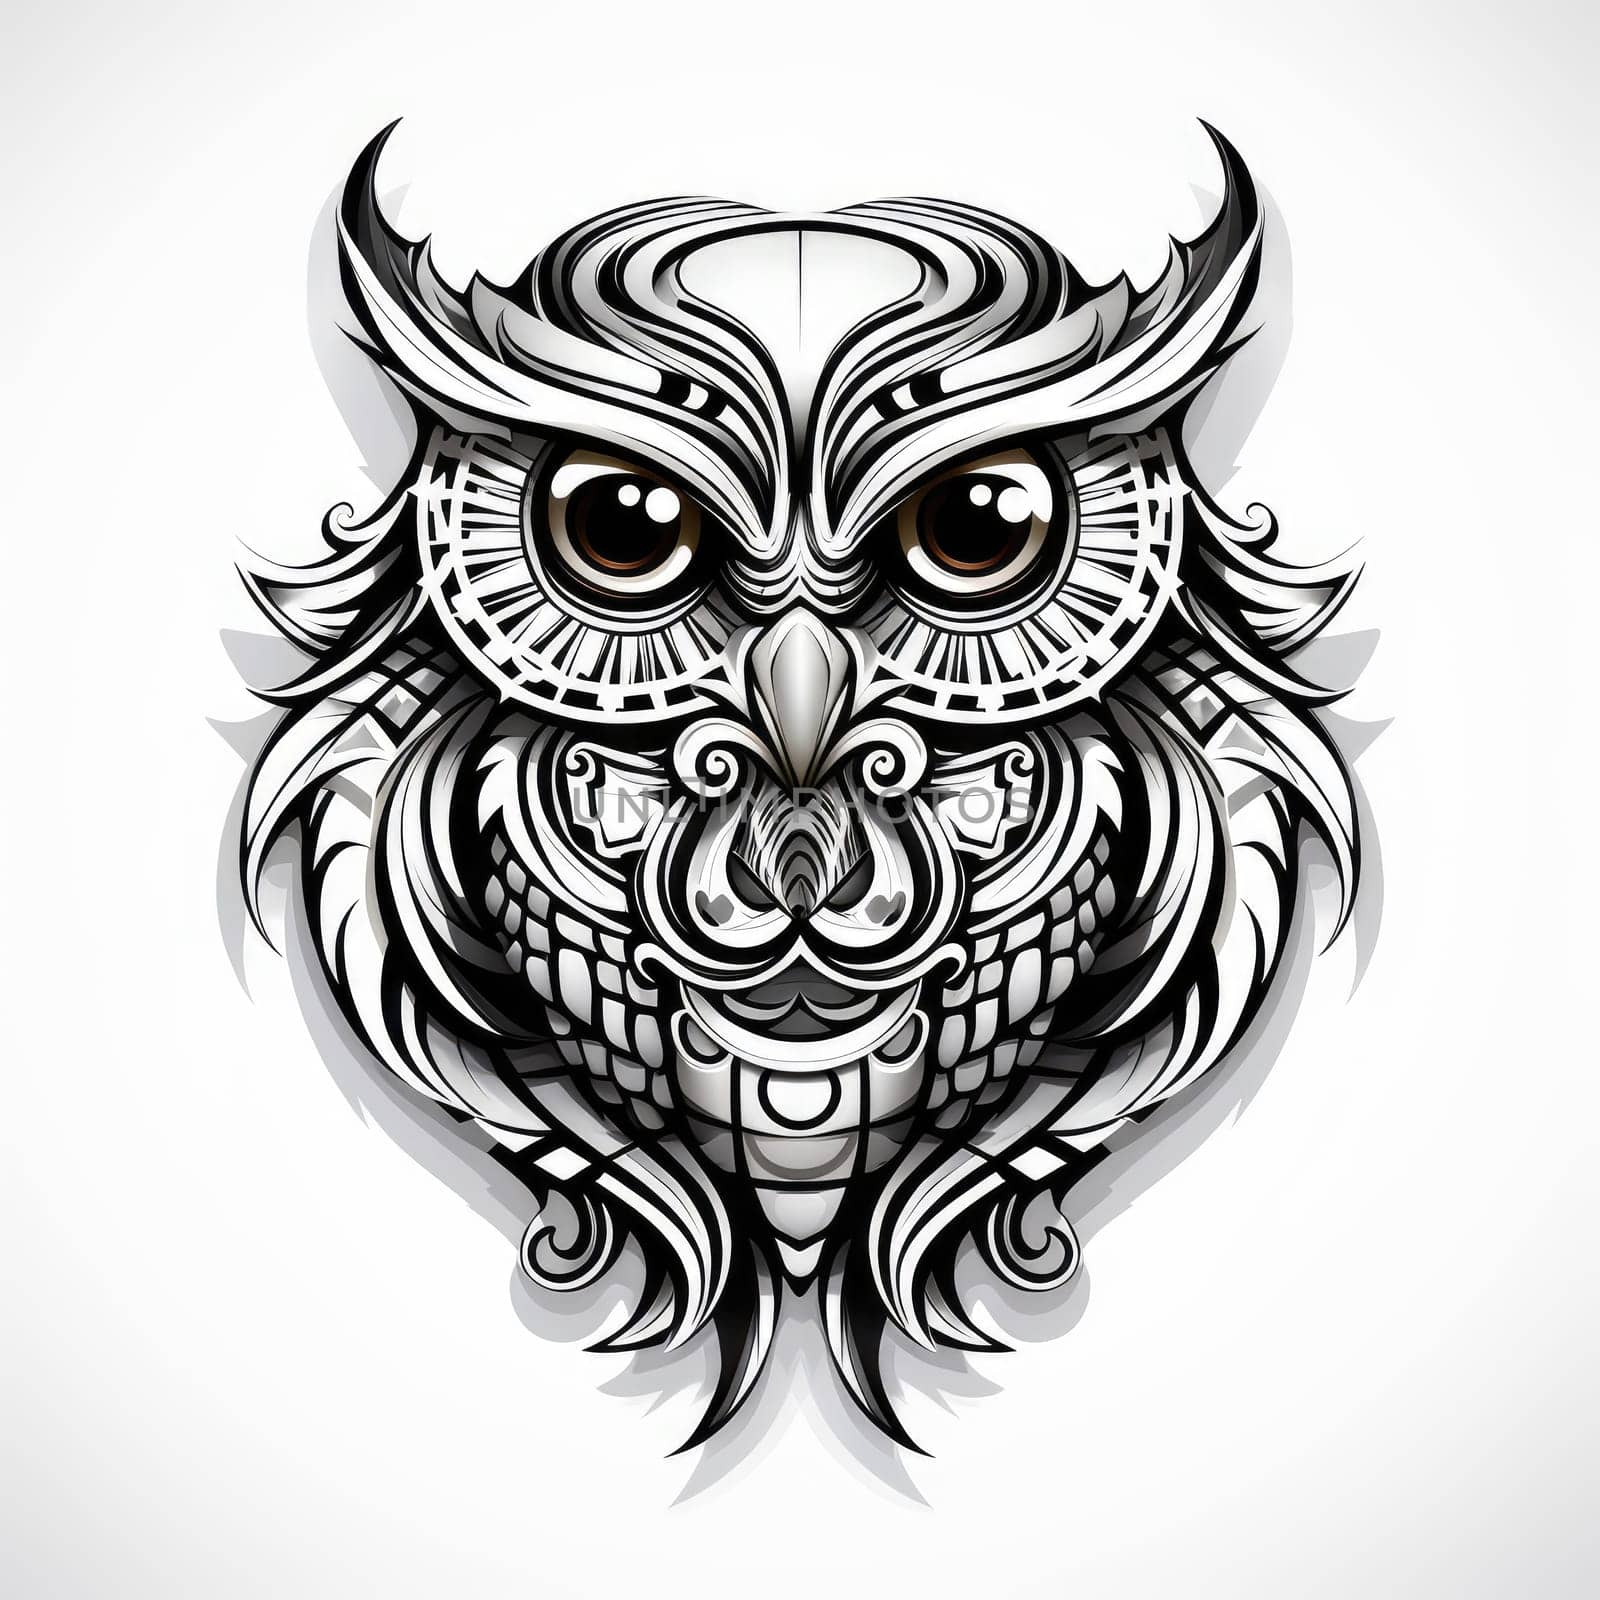 Abstract decorative portrait of an owl. Owl is a symbol of wisdom. Template for poster, logo, t-shirt print, sticker, etc.